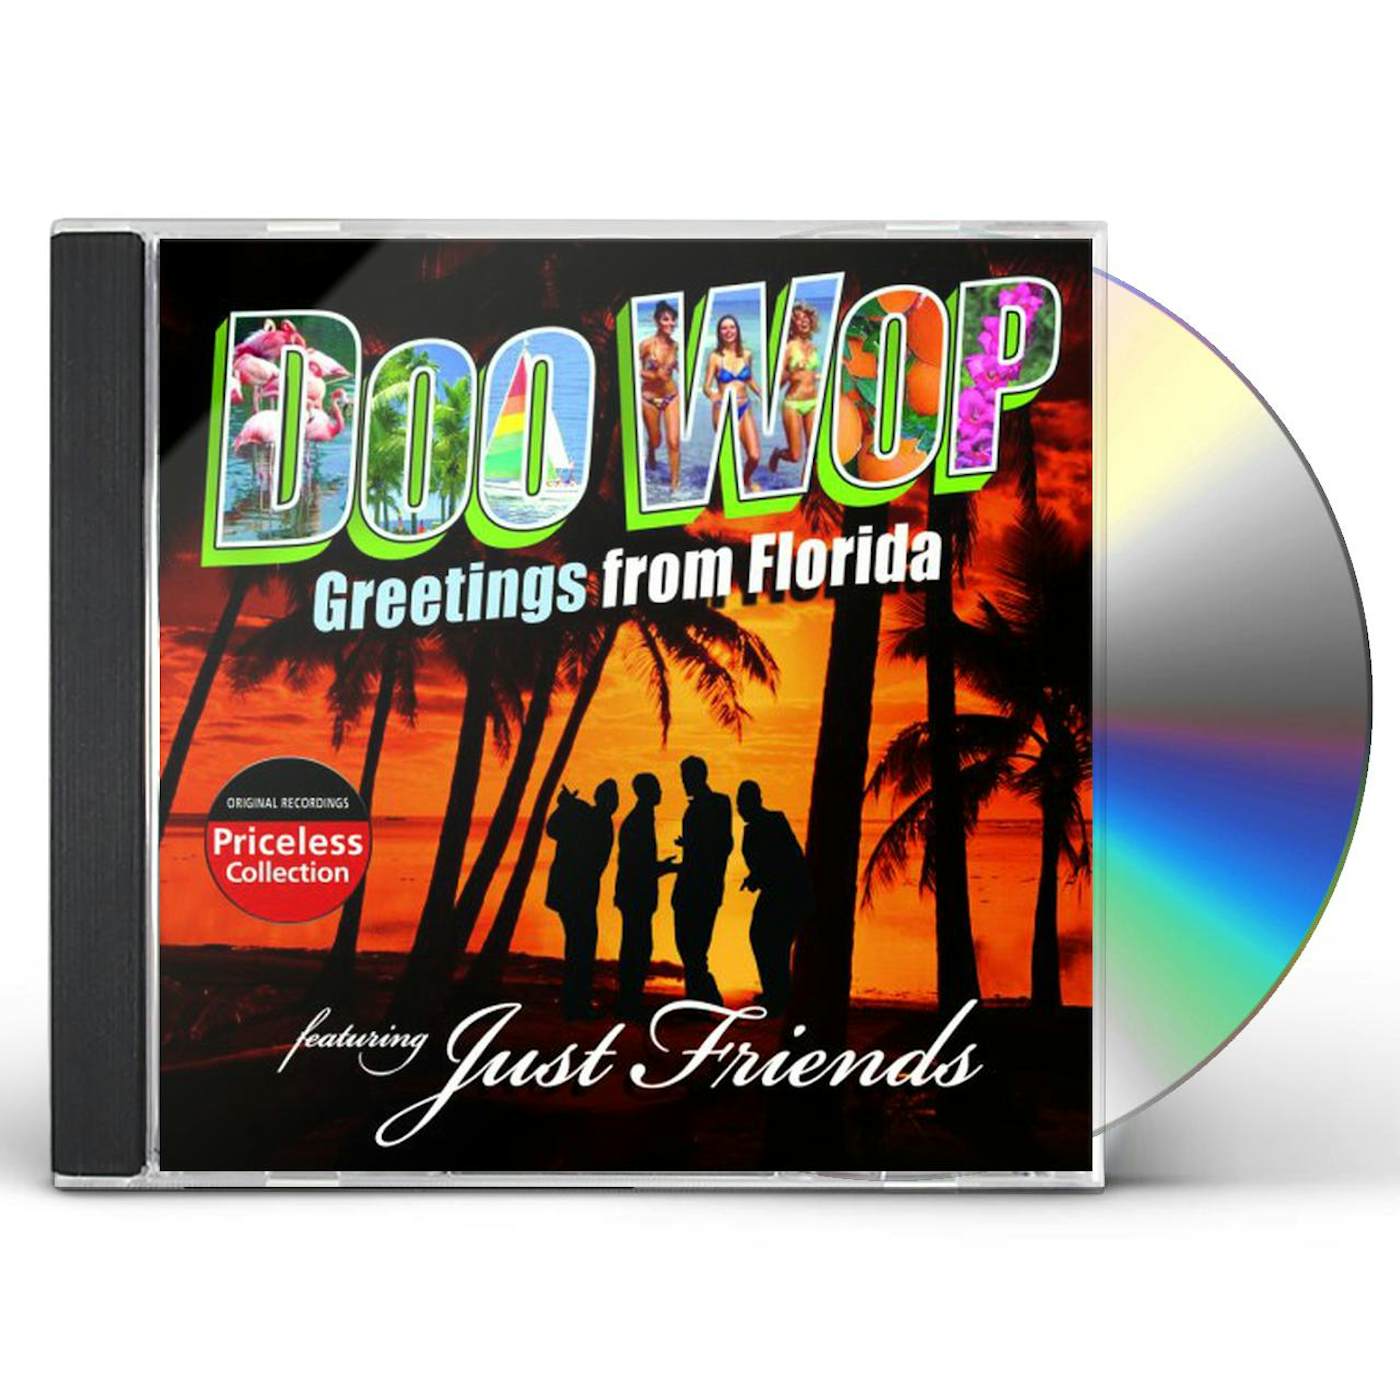 Just Friends: Doo Wop Greetings From Florida (CD, 2008, Collectables)  SEALED!